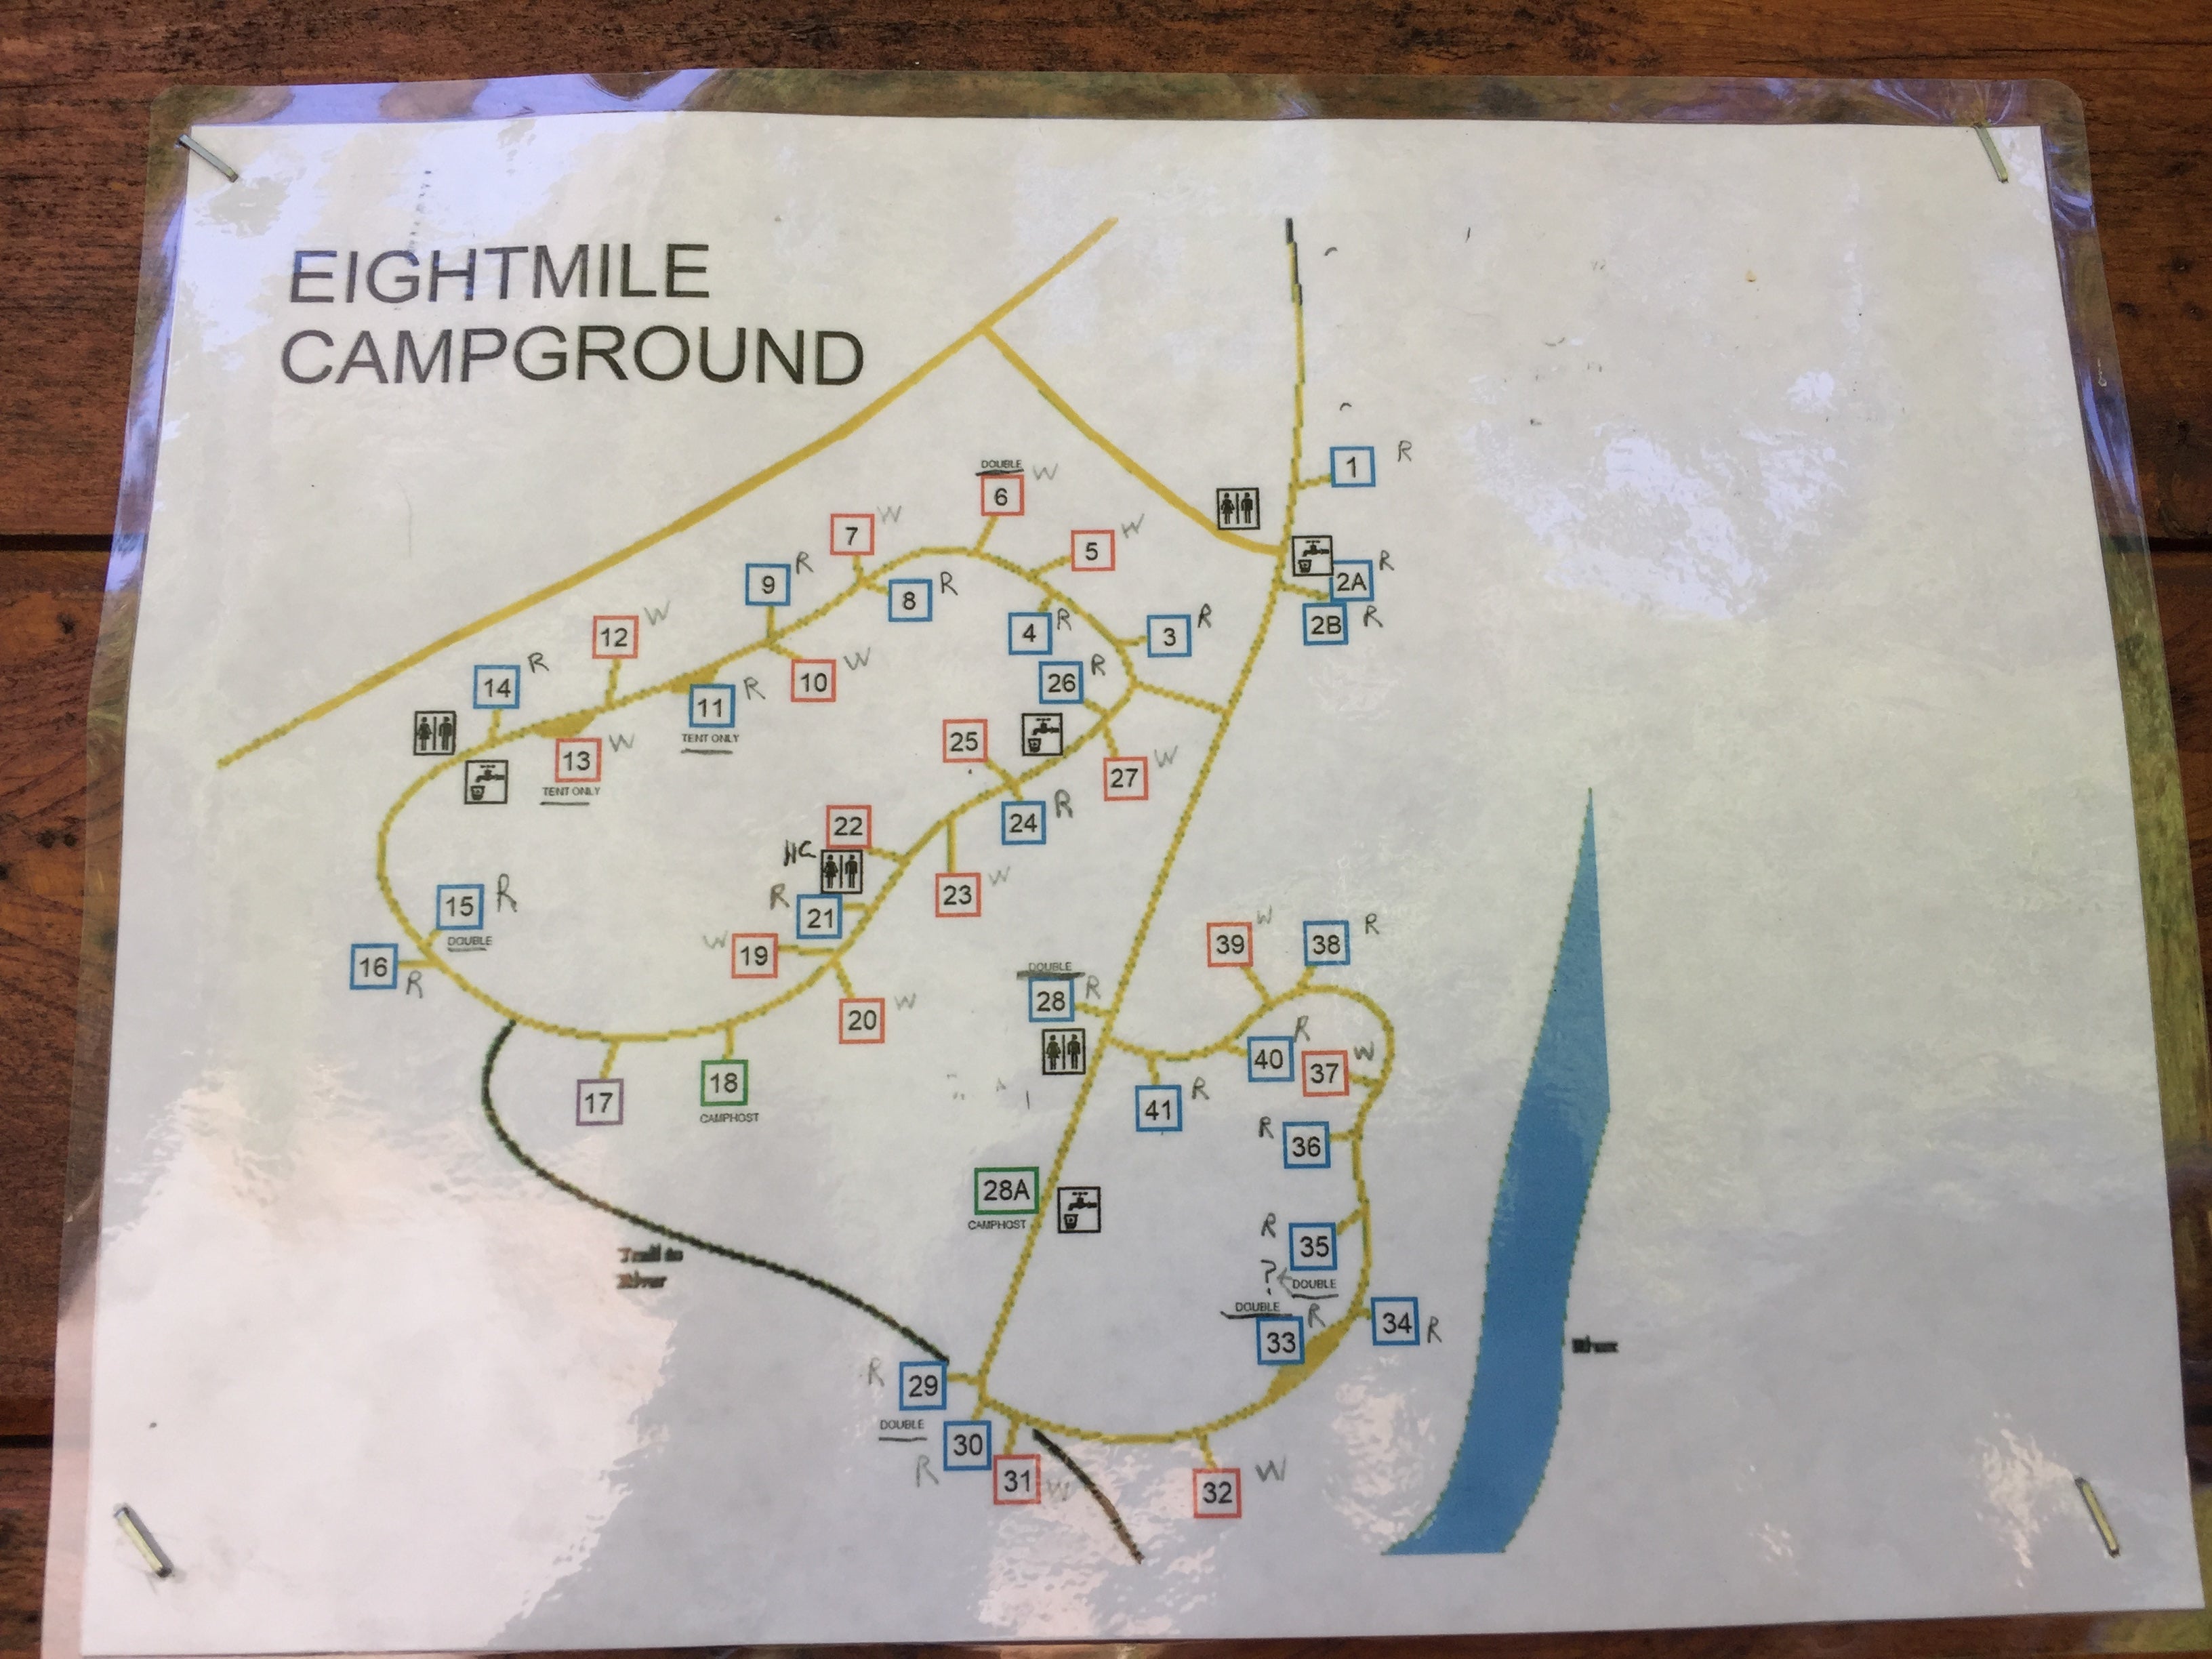 Campground Map from Campground board